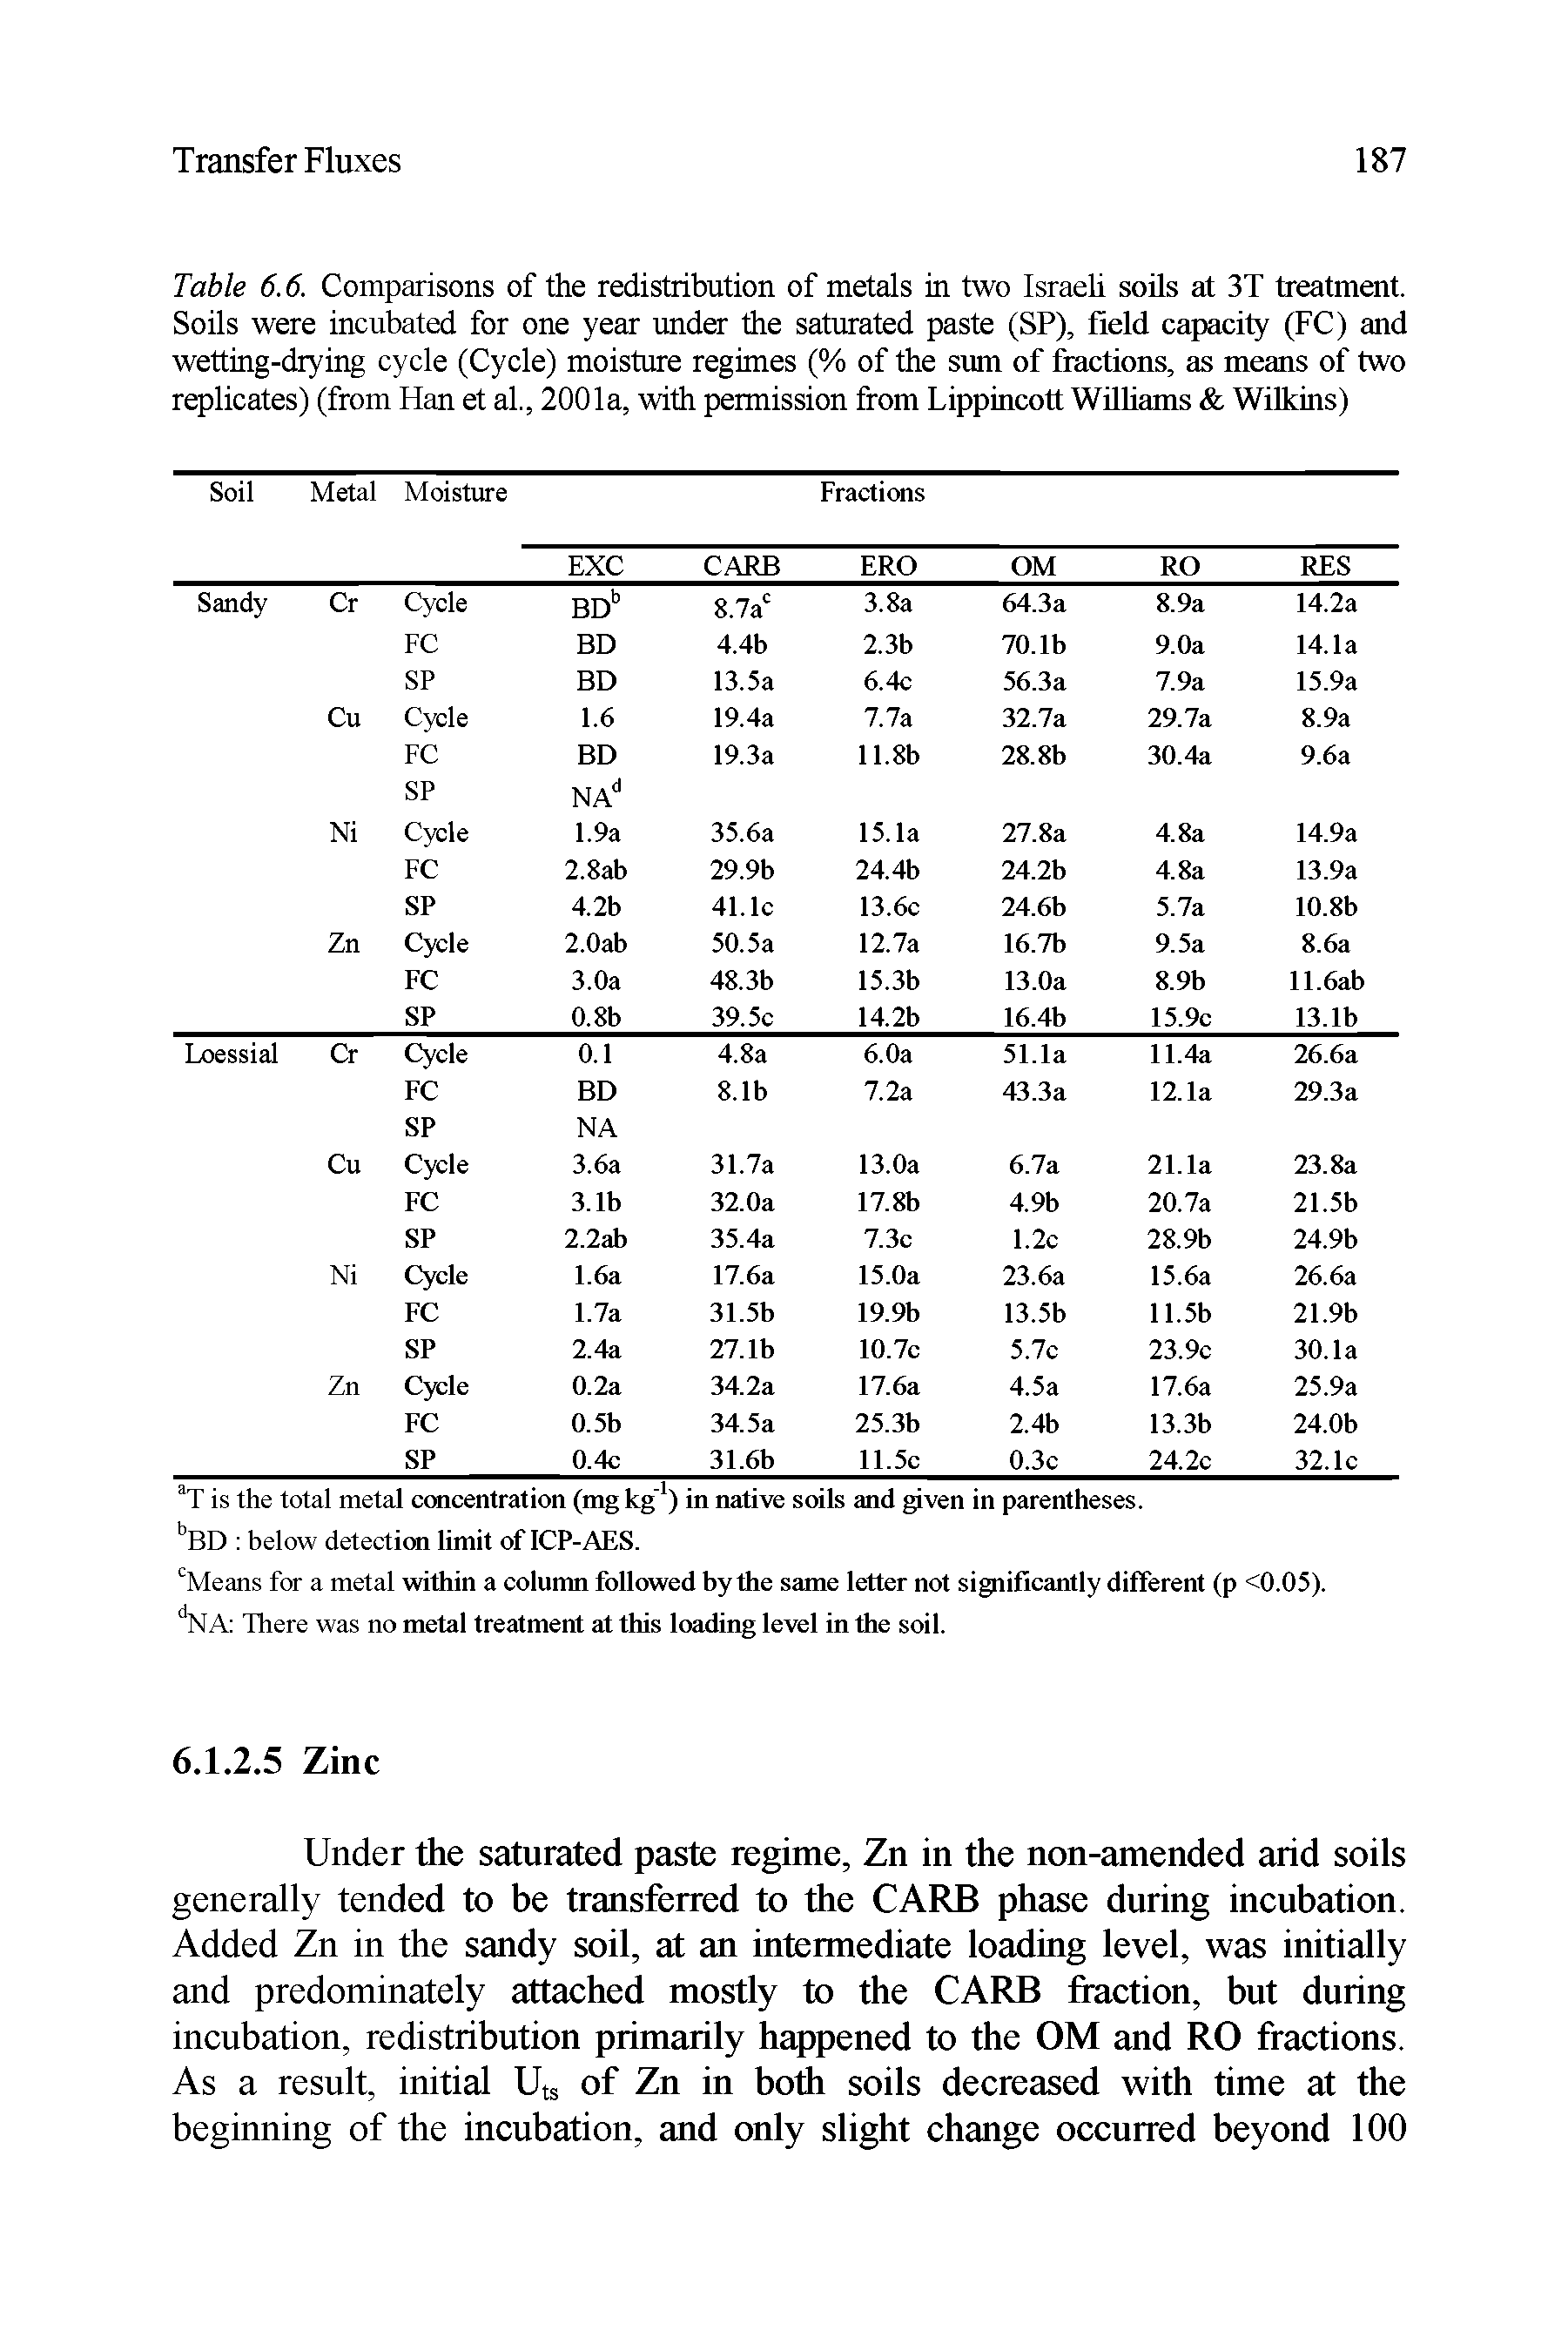 Table 6.6. Comparisons of the redistribution of metals in two Israeli soils at 3T treatment. Soils were incubated for one year under the saturated paste (SP), field capacity (FC) and wetting-drying cycle (Cycle) moisture regimes (% of the sum of fractions, as means of two replicates) (from Han et al., 2001a, with permission from Lippincott Williams Wilkins)...